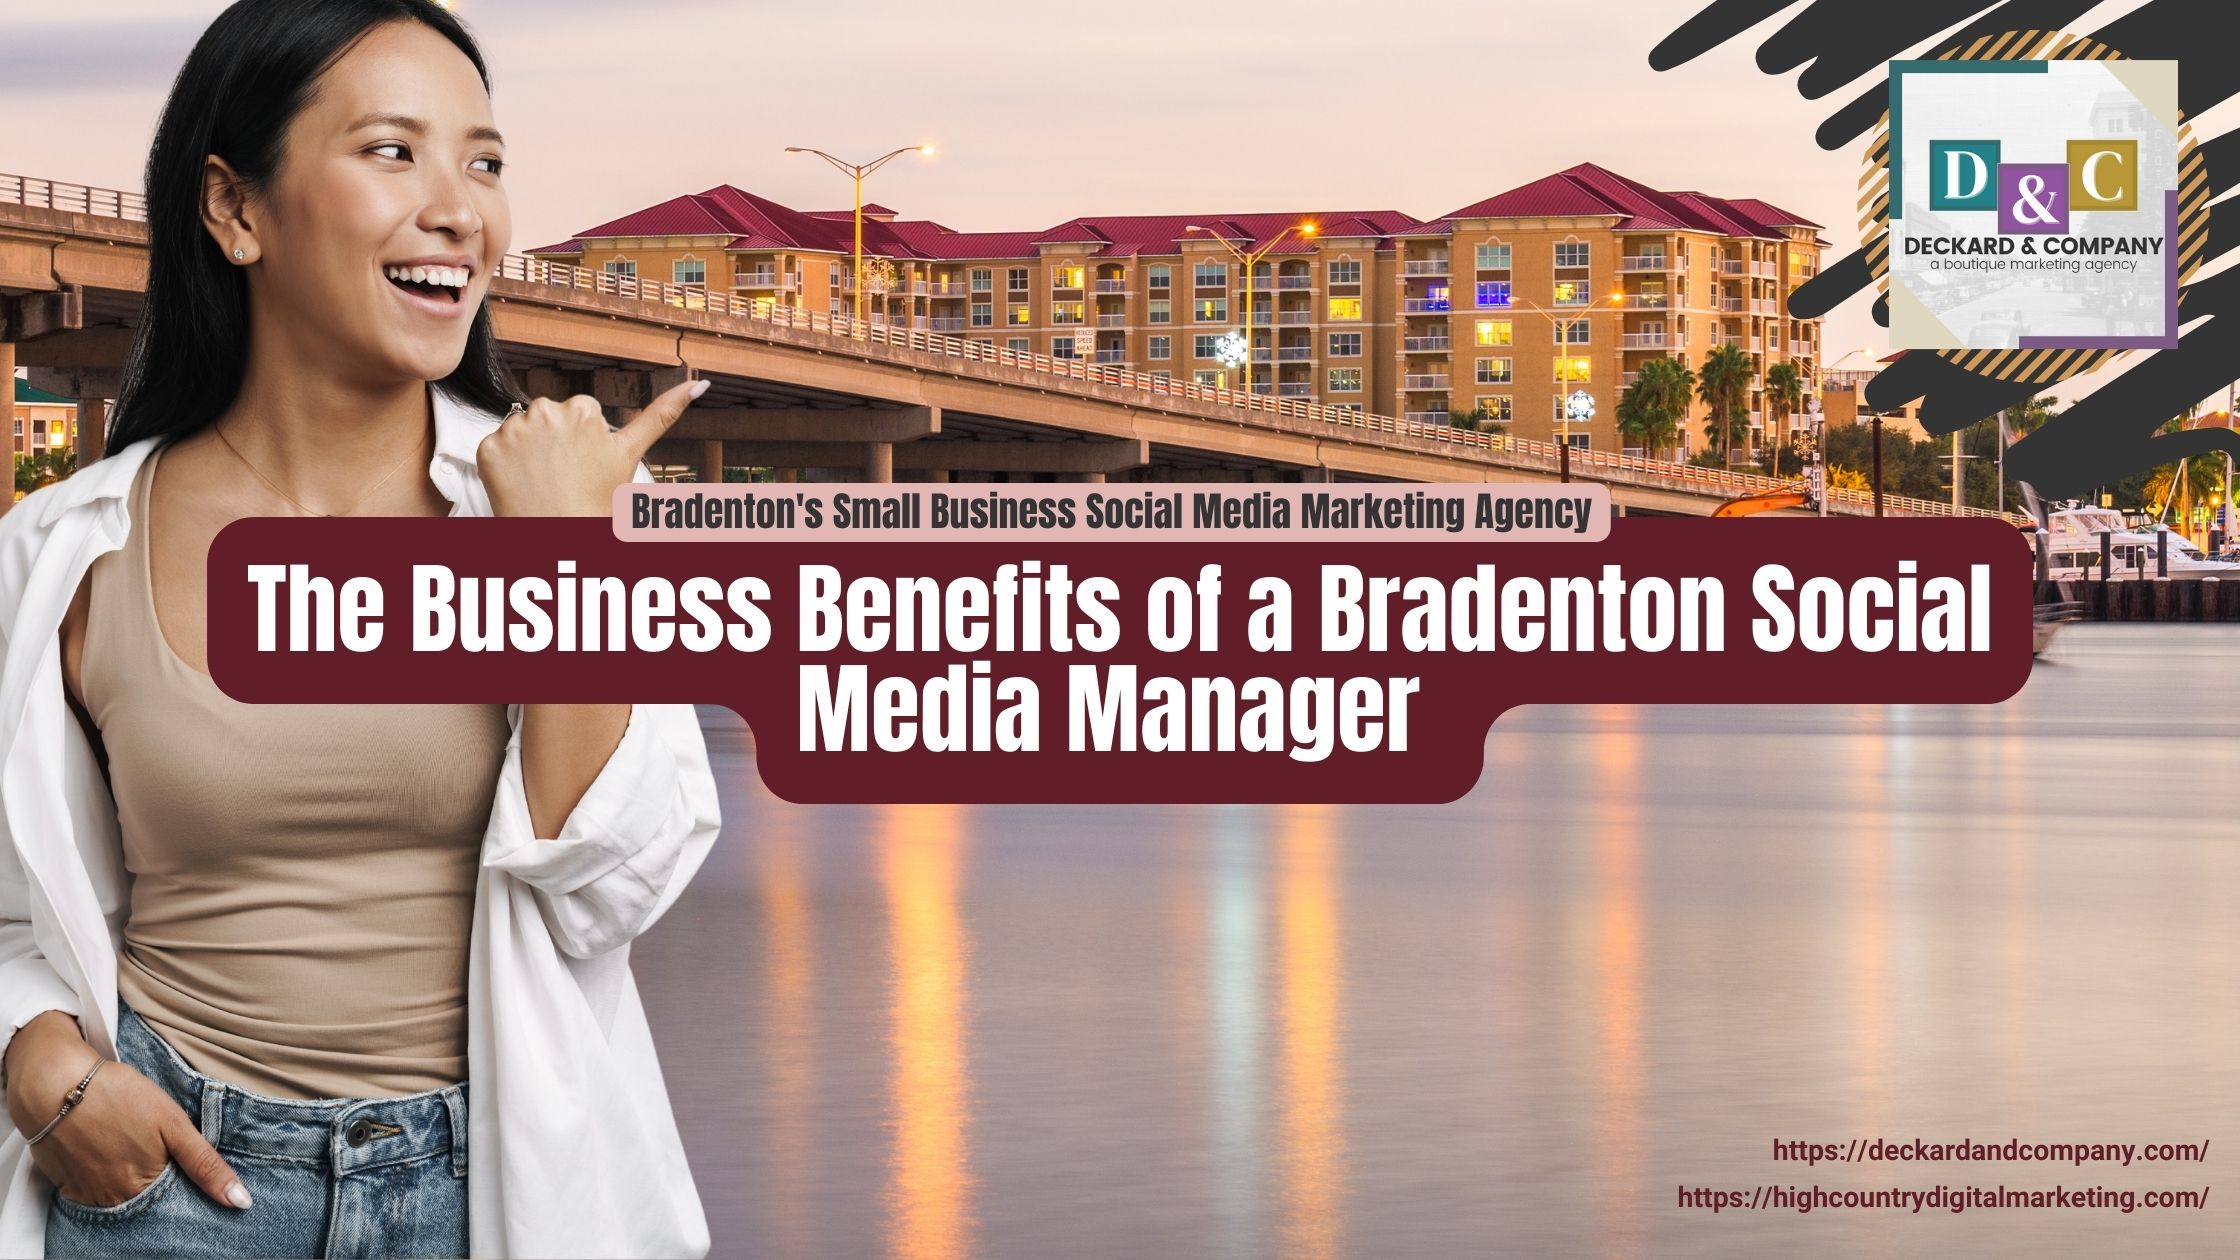 The Business Benefits of a Bradenton Social Media Manager by Deckard & Company, a Boutique Marketing Agency based in Bradenton, Florida